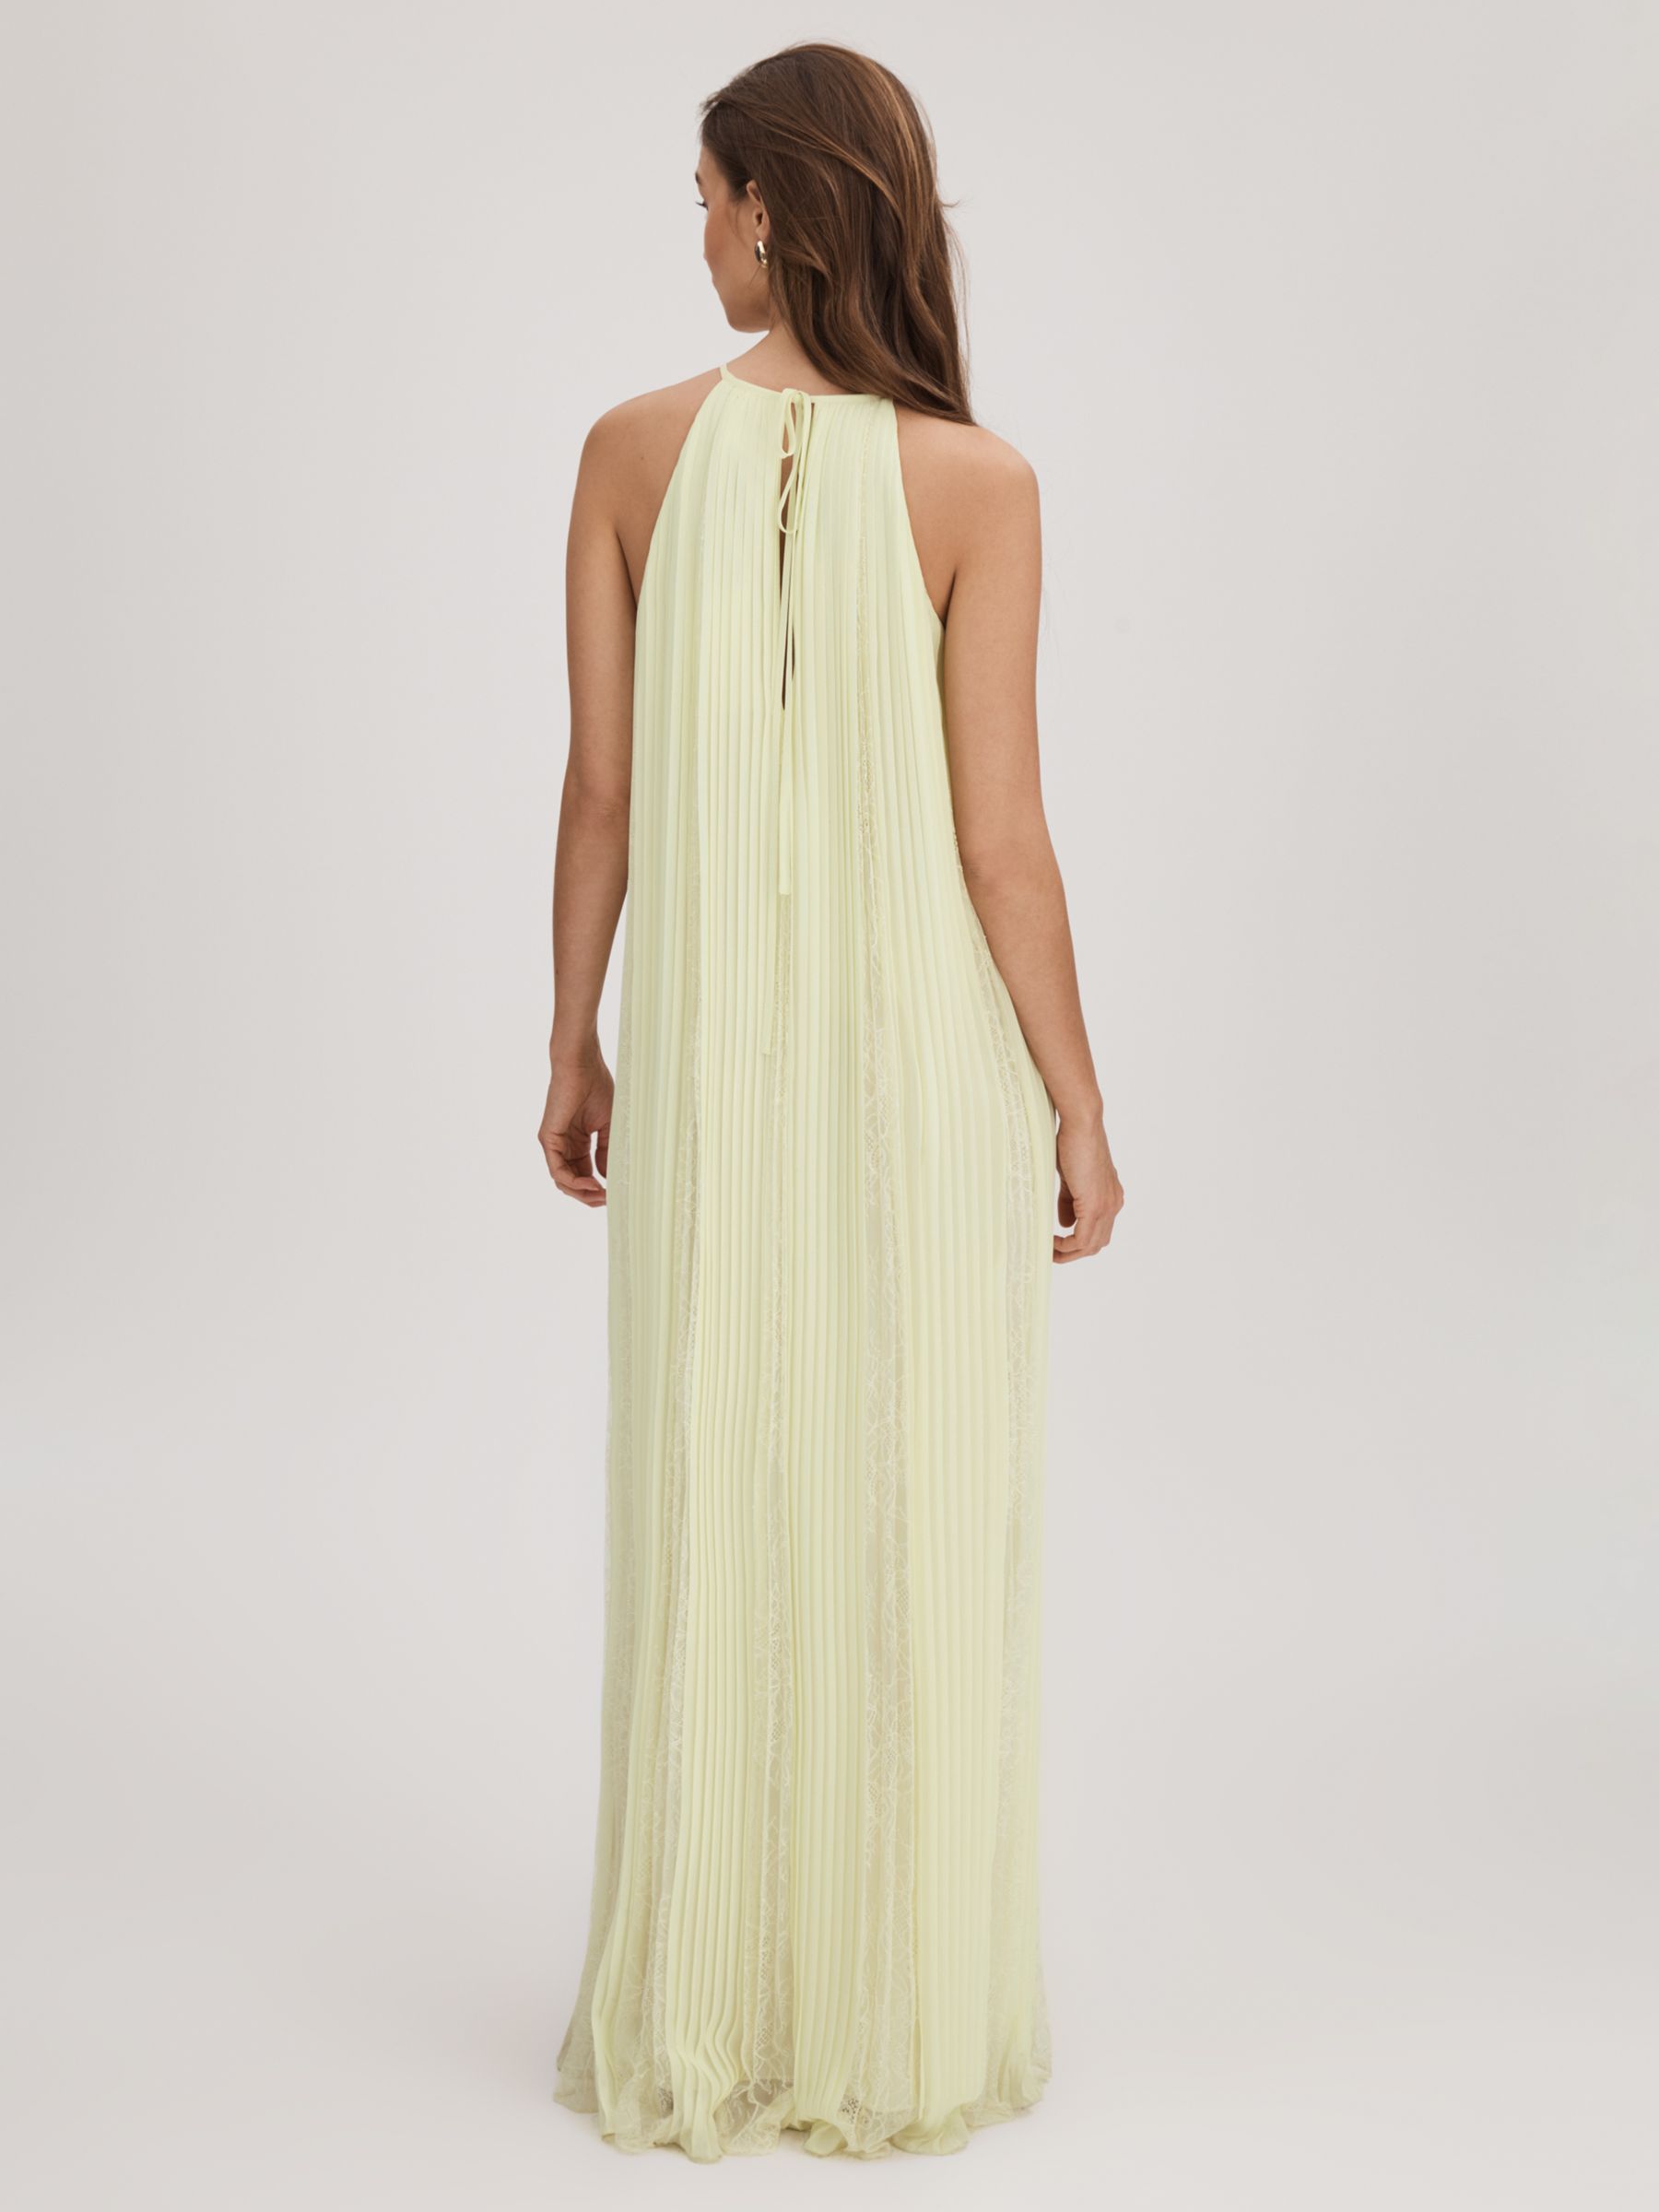 FLORERE Pleated Lace Panel Maxi Dress, Pale Green, 16